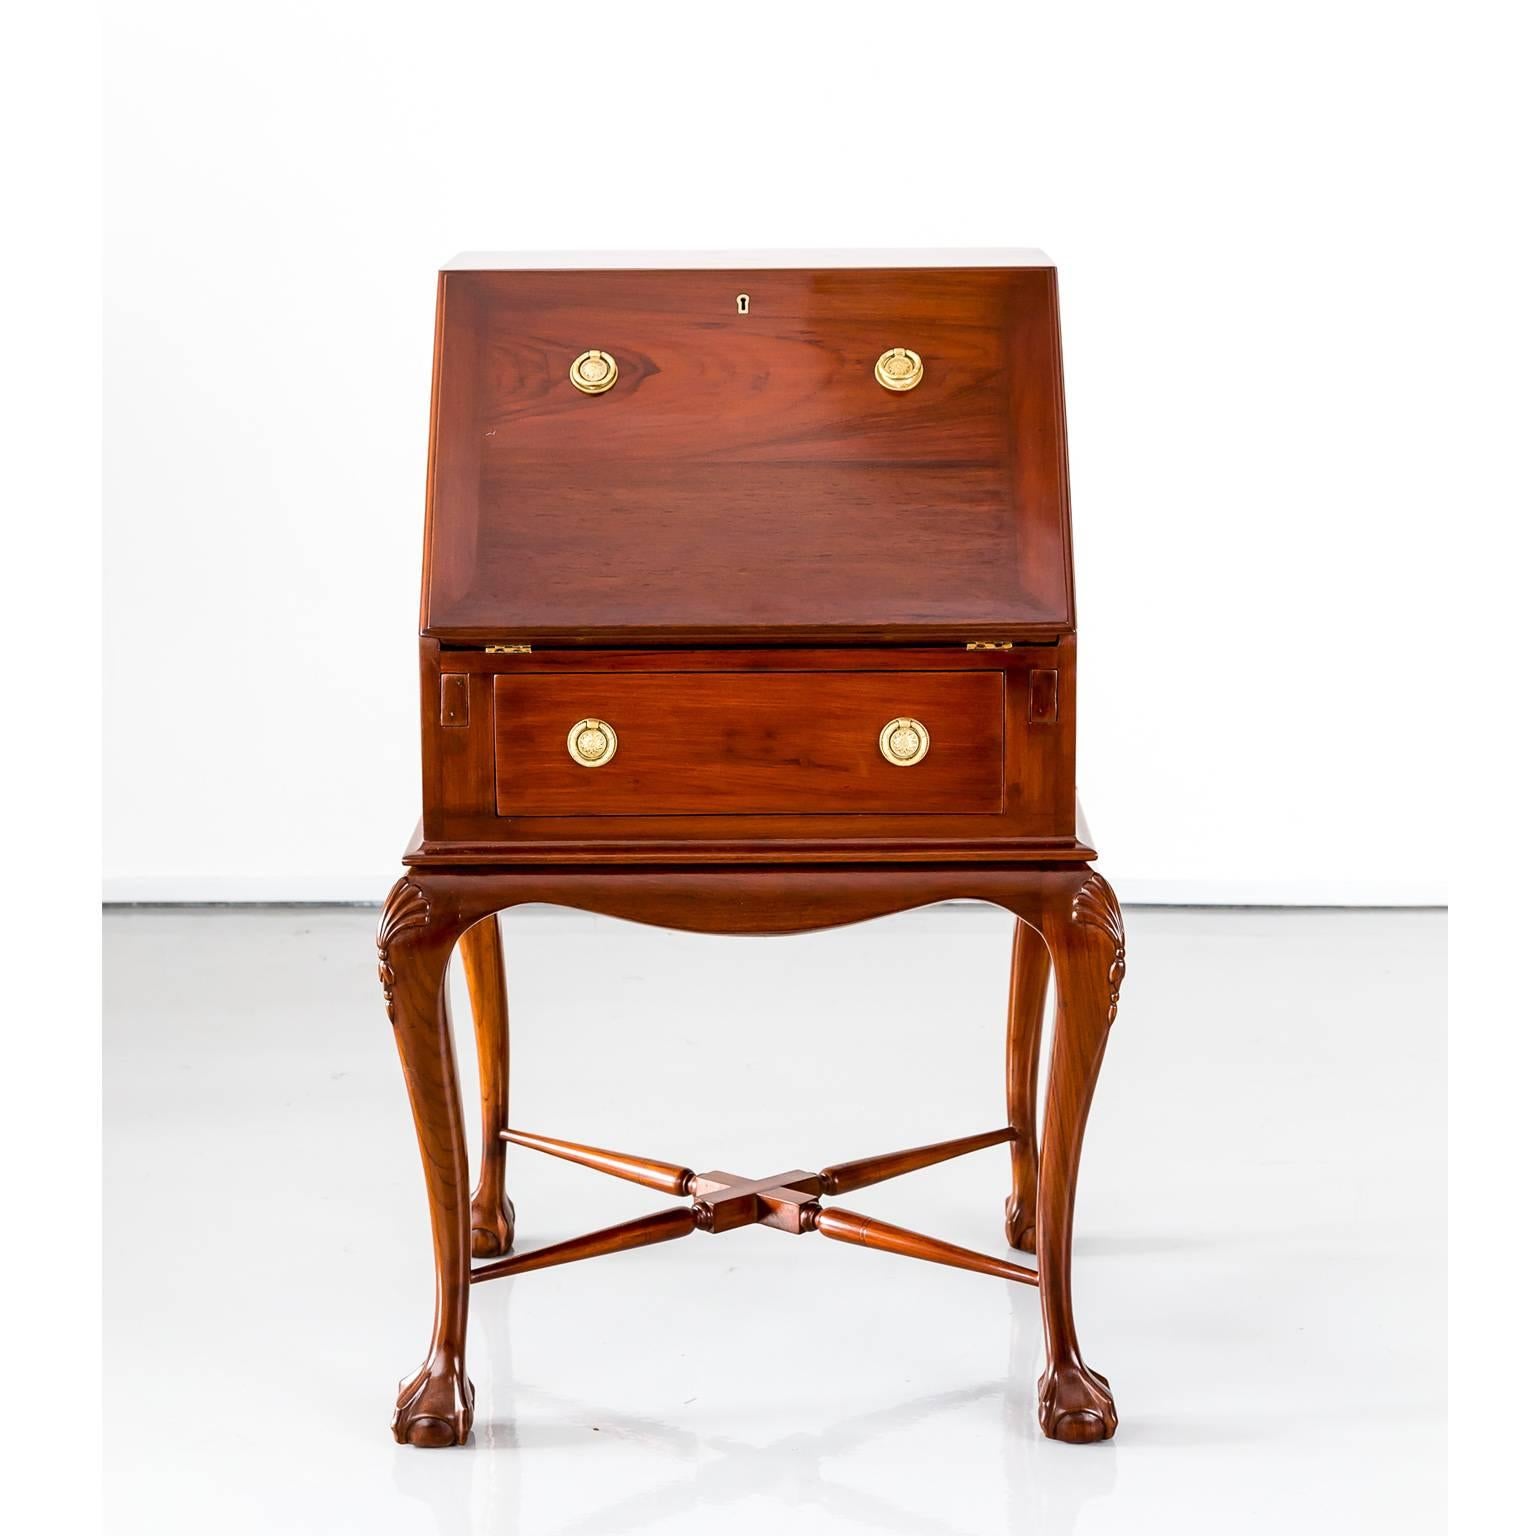 A nice, unusual size British Colonial drop front desk in teak wood. 
The slanted top opens to form the writing surface which has a new black leather inset. The fitted interior features two one drawer and several document compartments. 
It stands